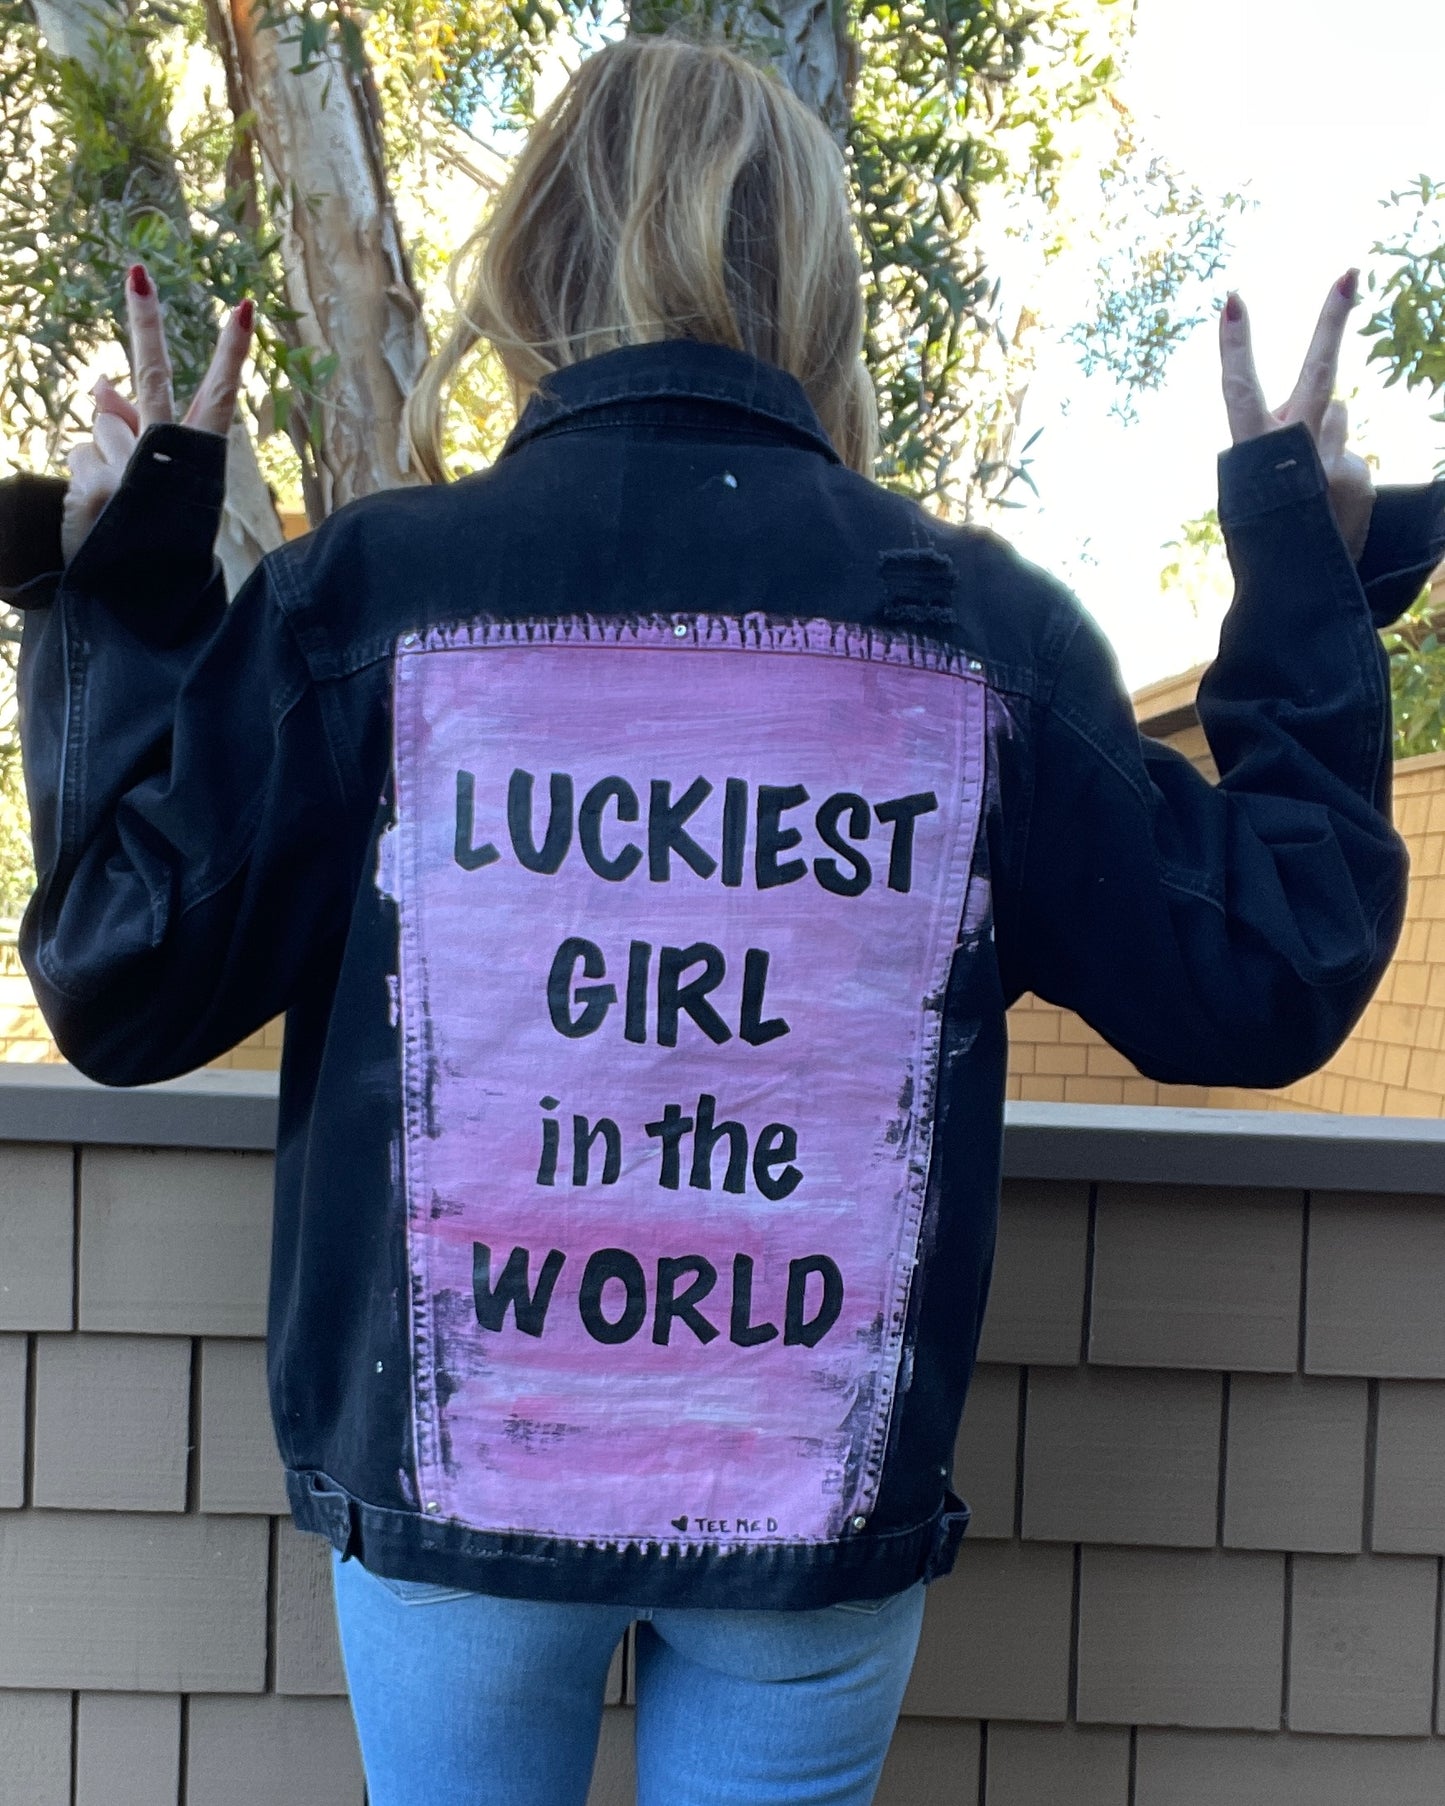 LUCKIEST GIRL Everything works out for me! - Hand painted jacket